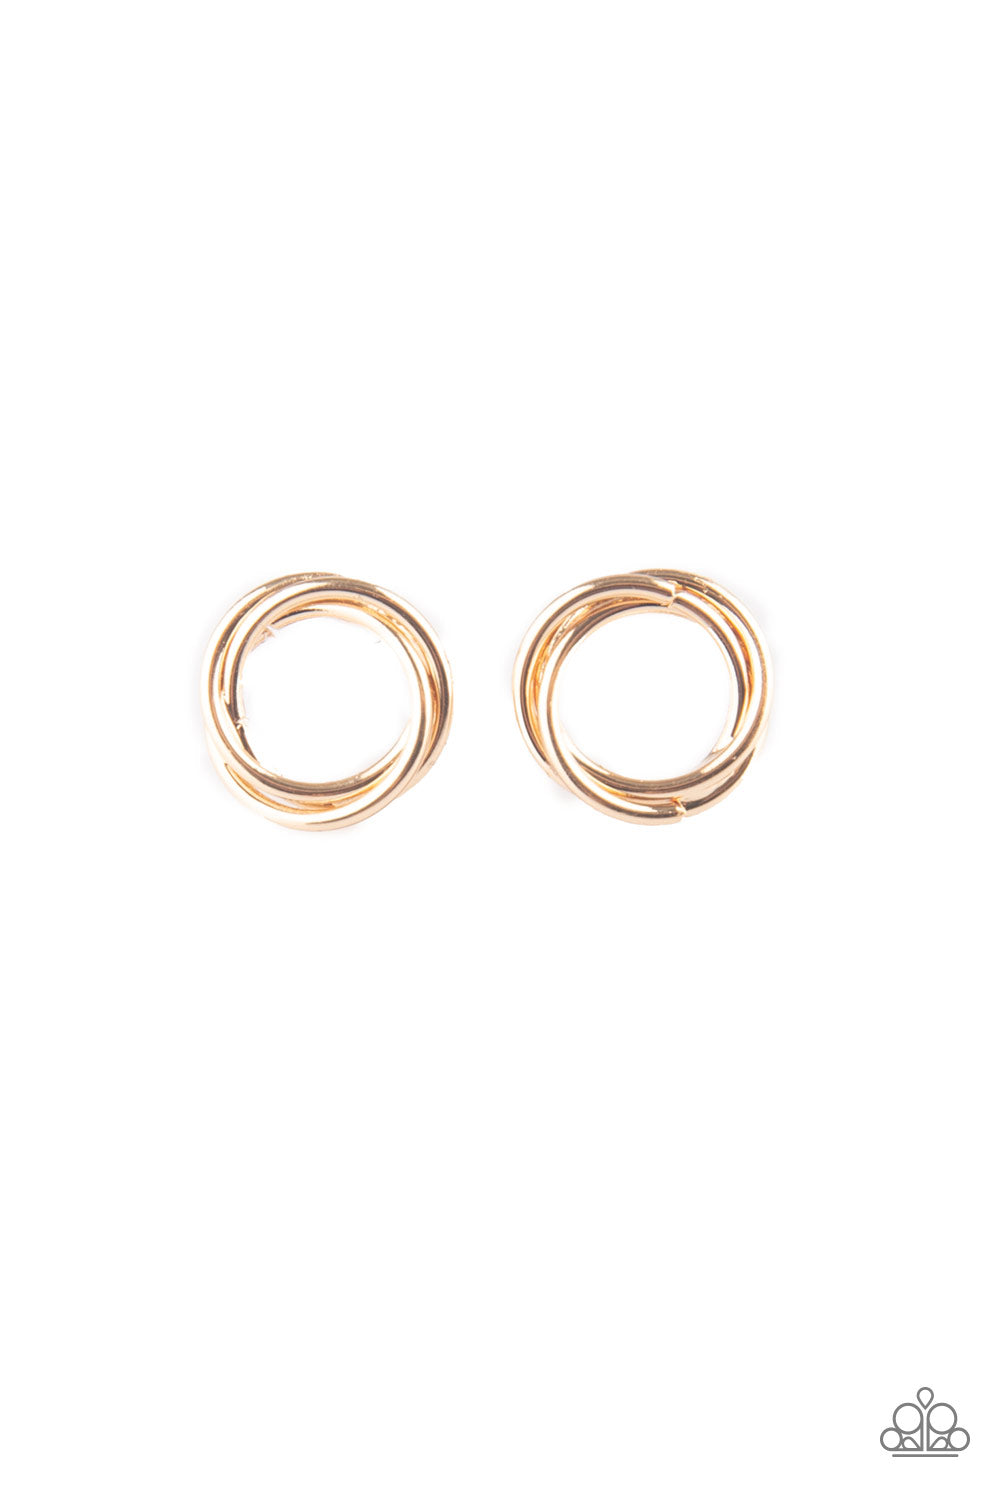 Simple Radiance - Gold Earrings - Paparazzi Accessories